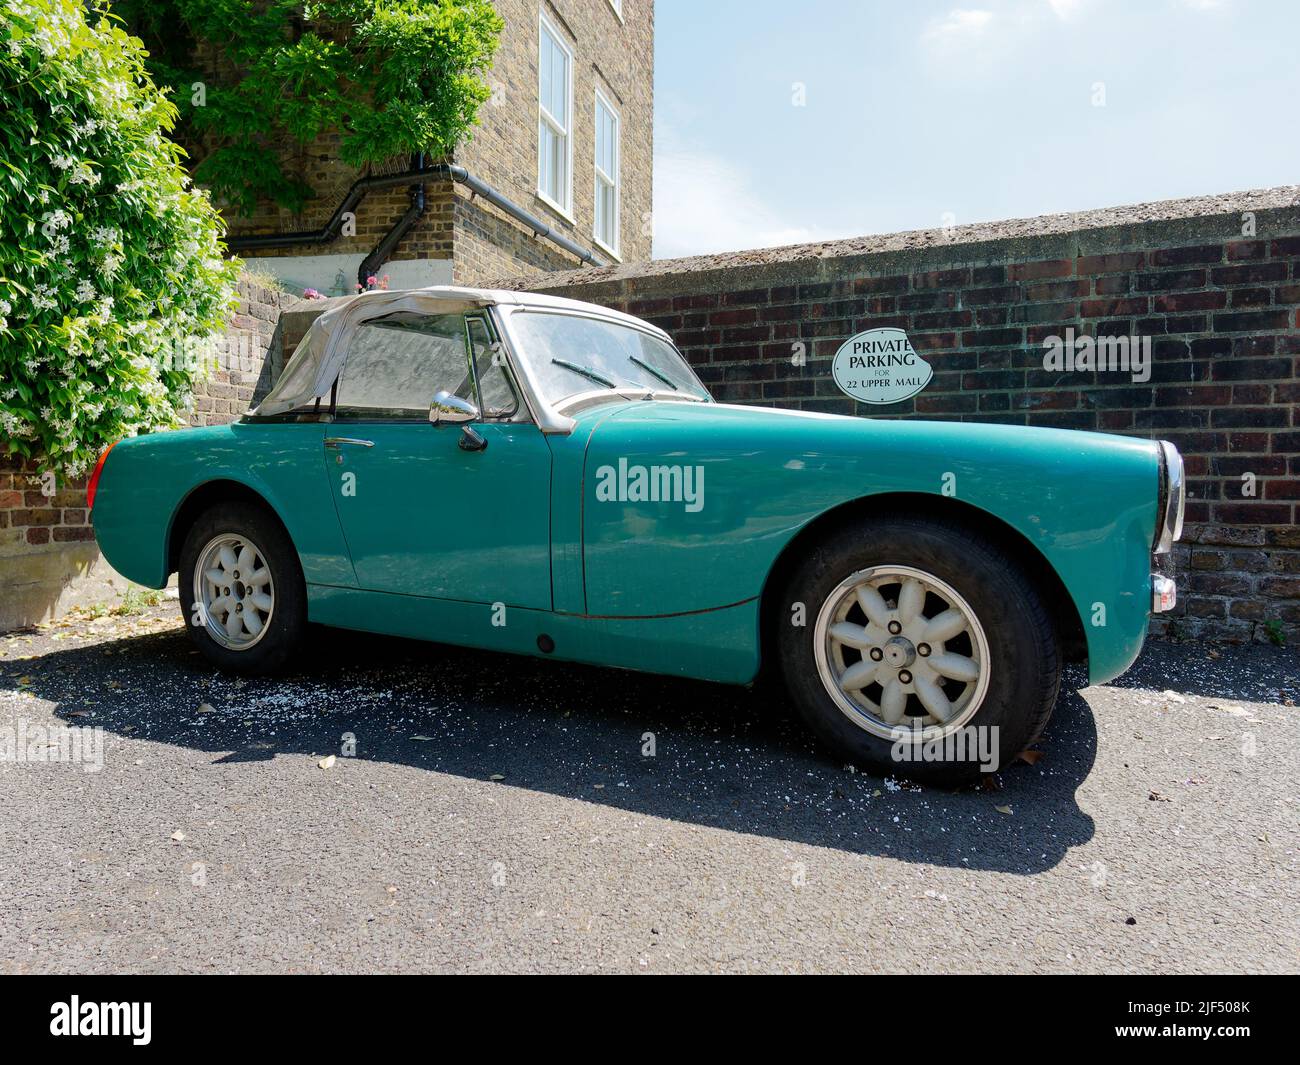 London, Greater London, England, June 15 2022: Classic convertible sports car in turquoise with a white roof in a private parking spot in Hammersmith. Stock Photo